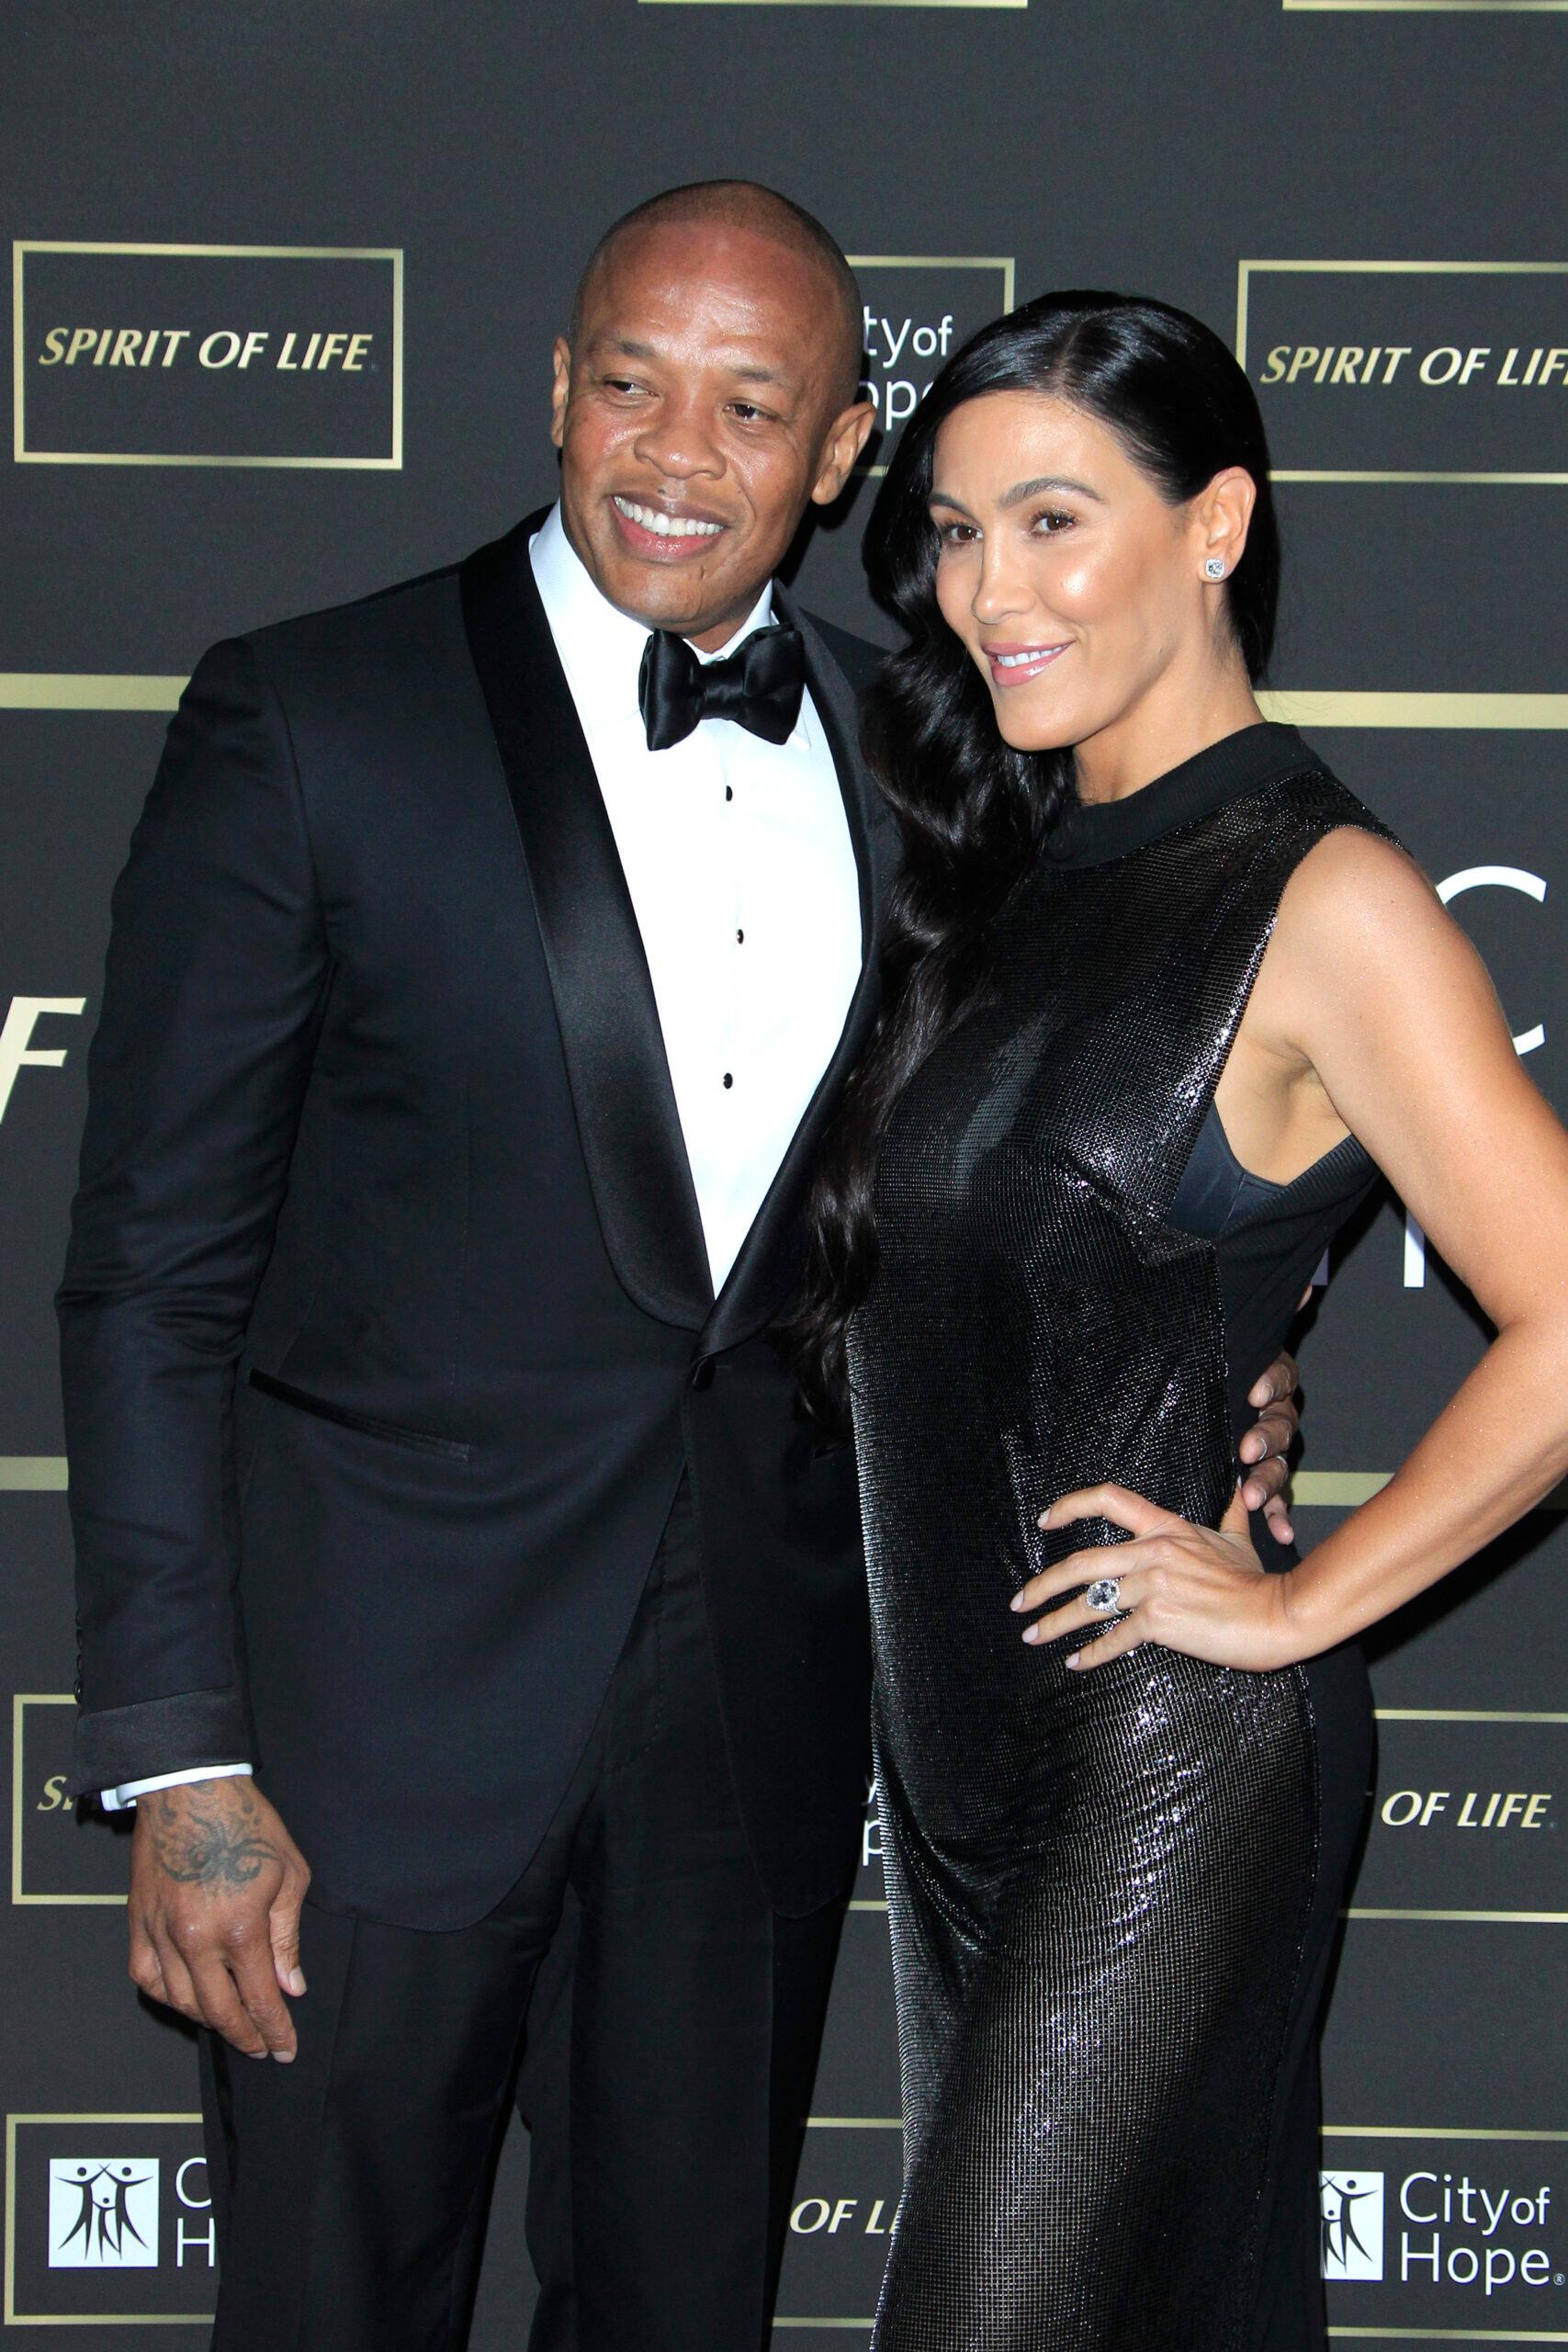 Dr Dre and Nicole Young at City of Hope Gala - Santa Monica